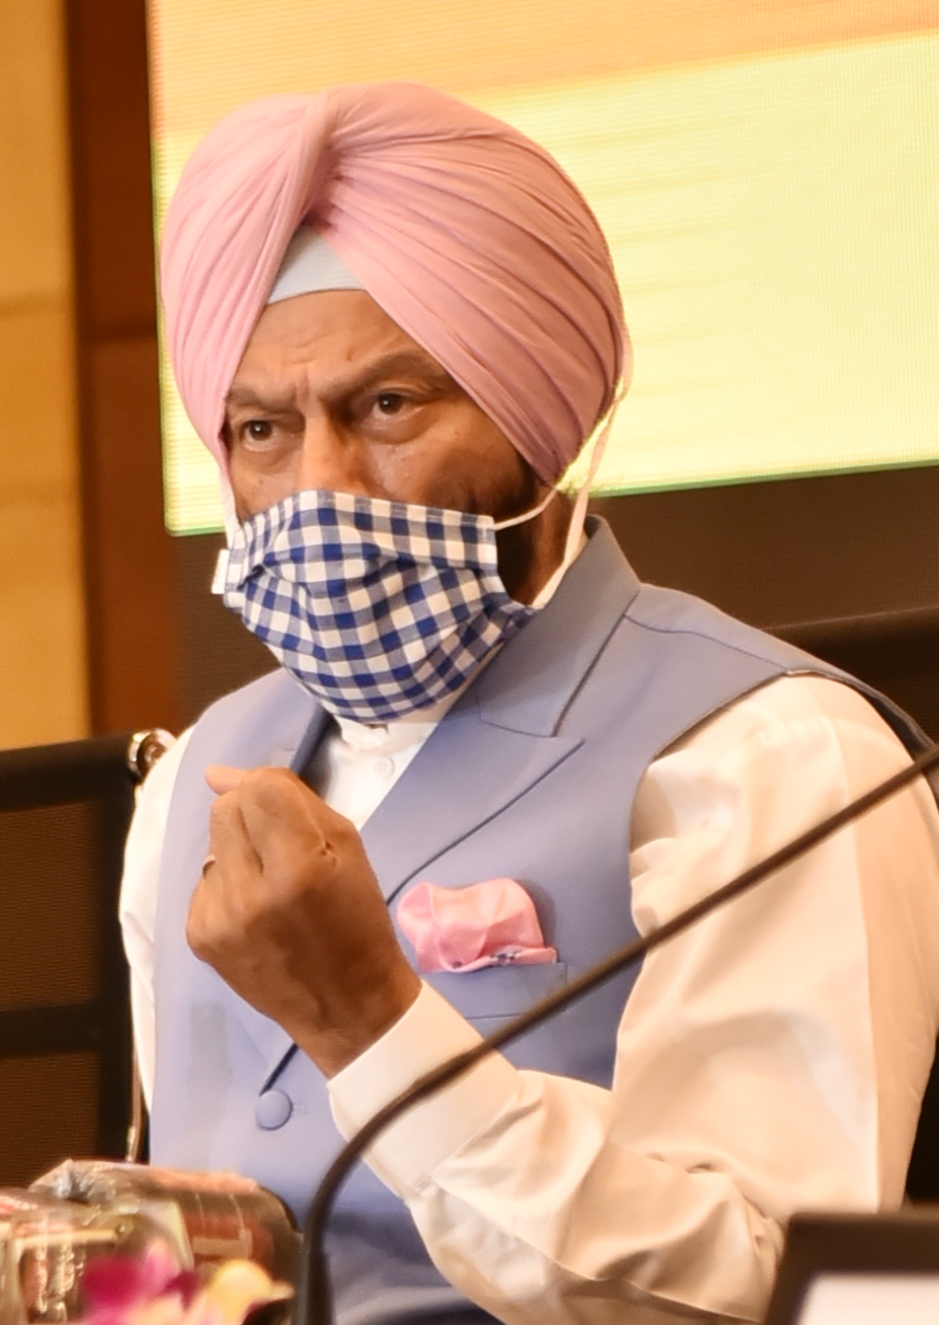 Brainchild of Chief Minister, Maharaja Bhupinder Singh Punjab Sports University will come into being with Rs.500 crore, Sports Minister Rana Sodhi